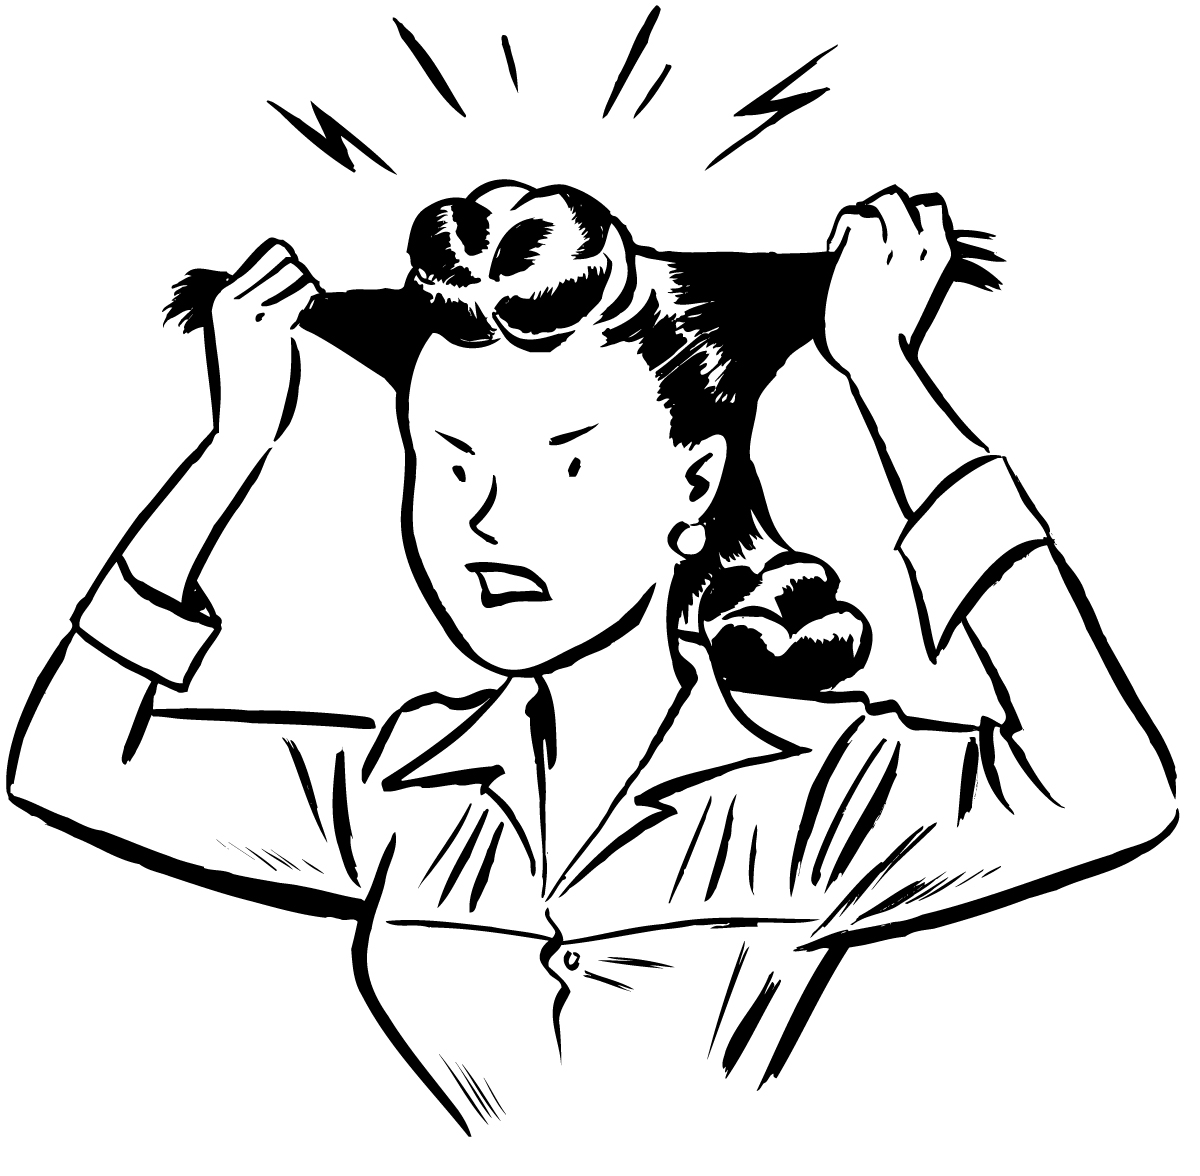 Pics Of Stressed Out People   Clipart Best